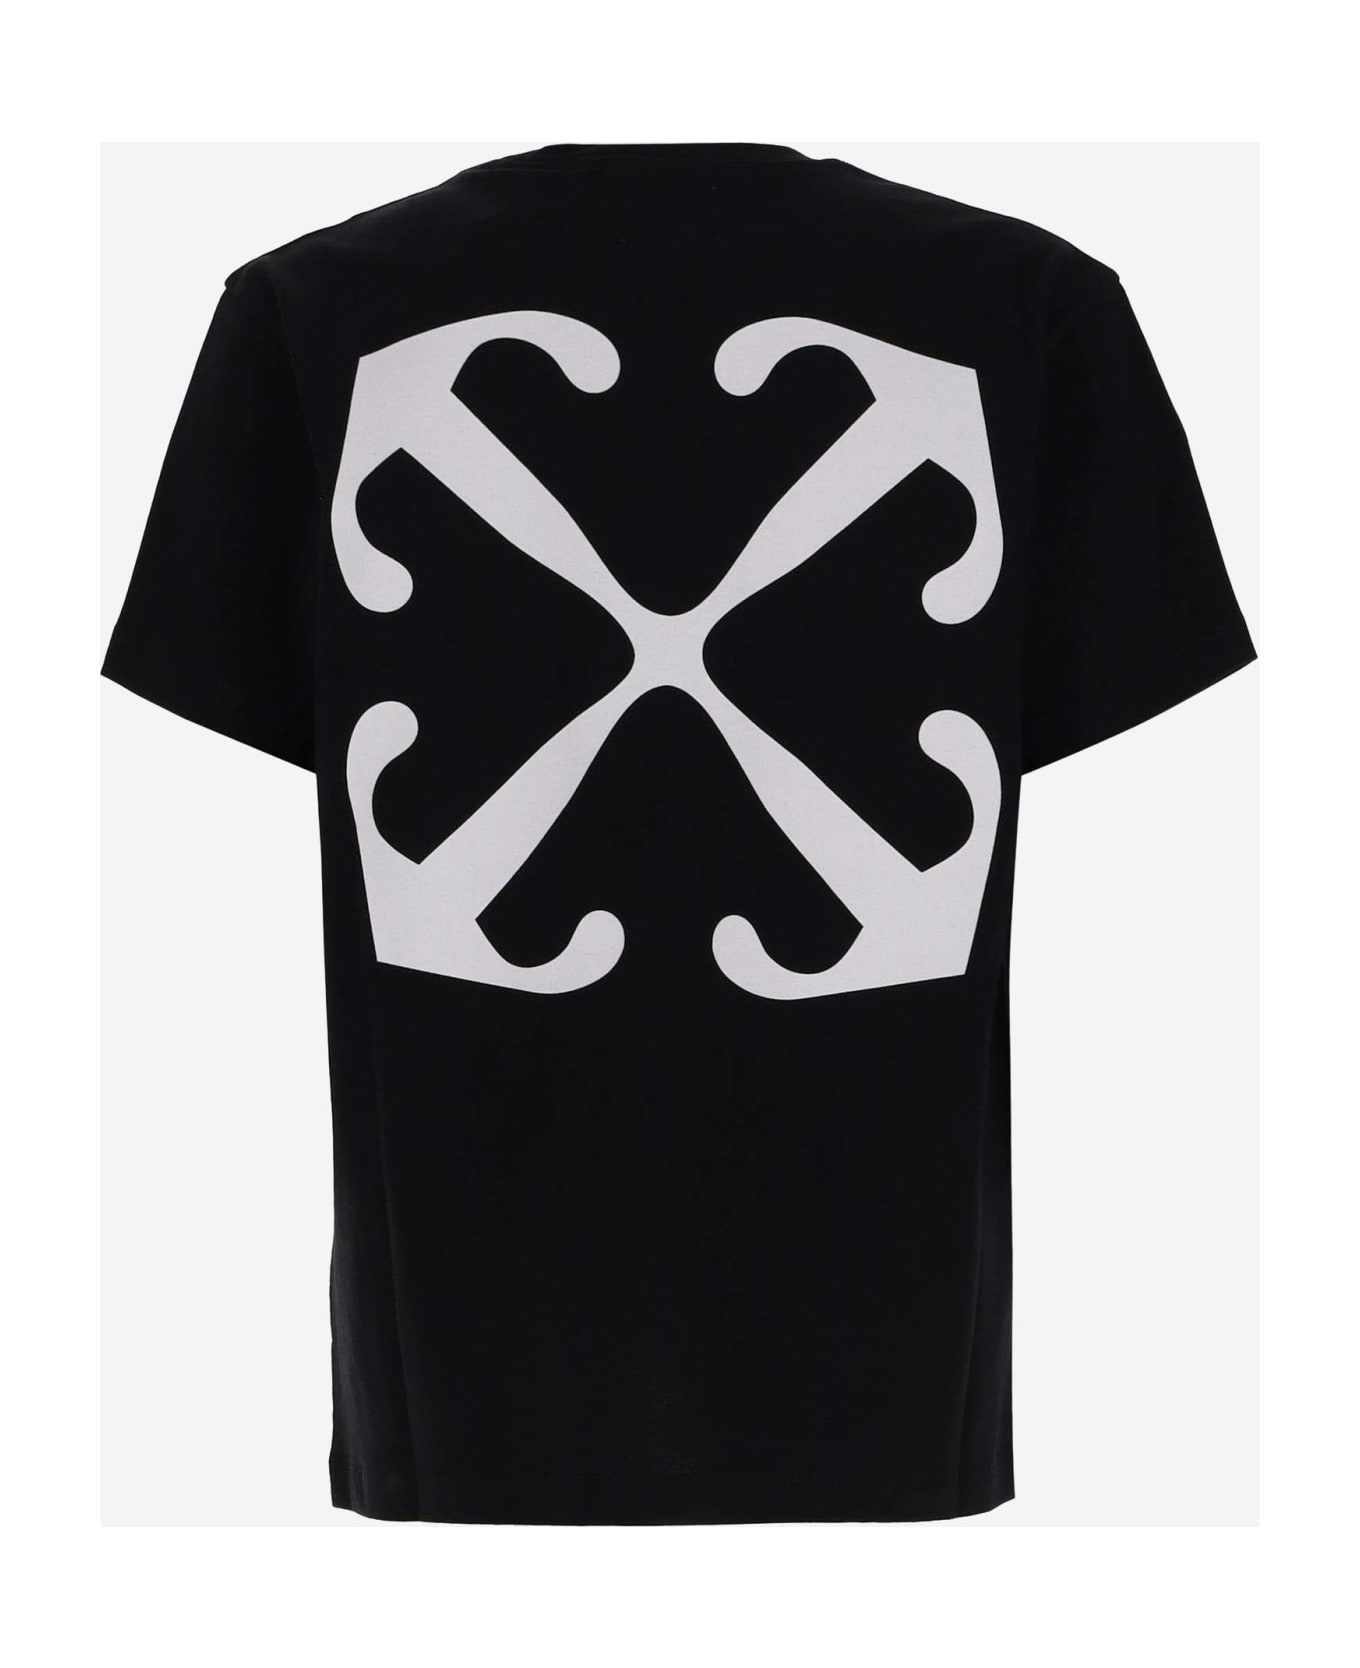 Off-White Cotton T-shirt With Logo - Black